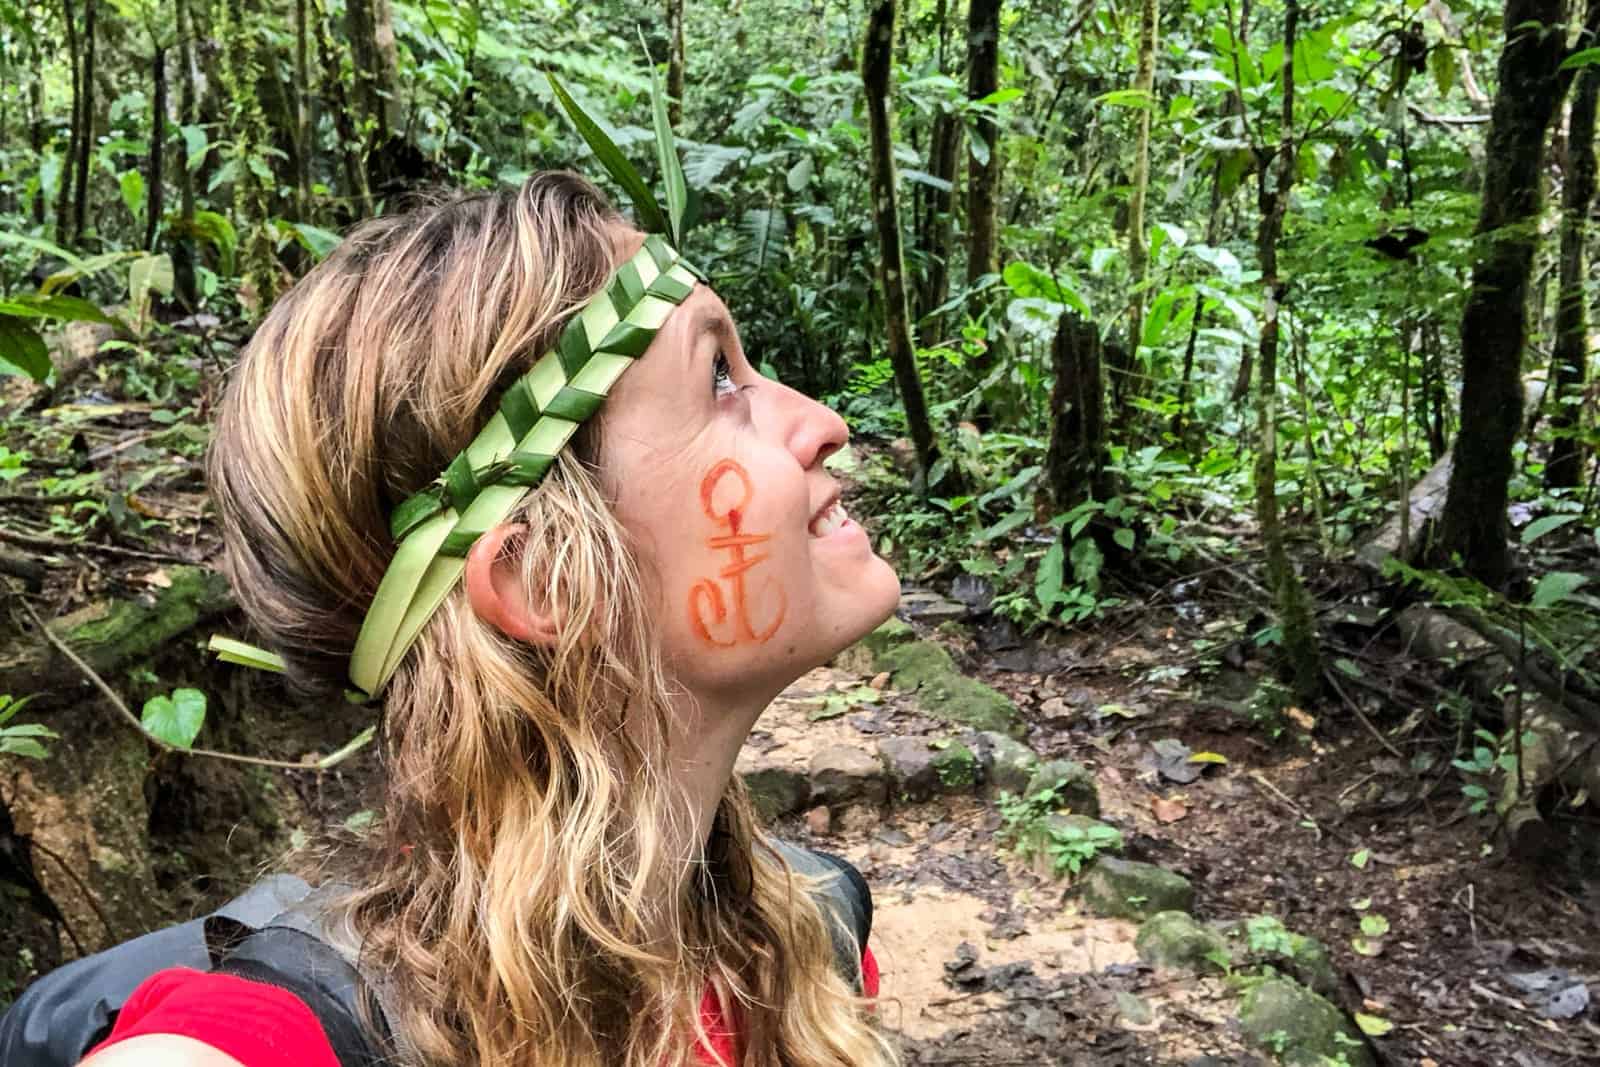 A woman with long blonde hair, wearing a headband made of woven plants and with a painted symbol on her face, stands within a jungle and looks up into the thick foliage.